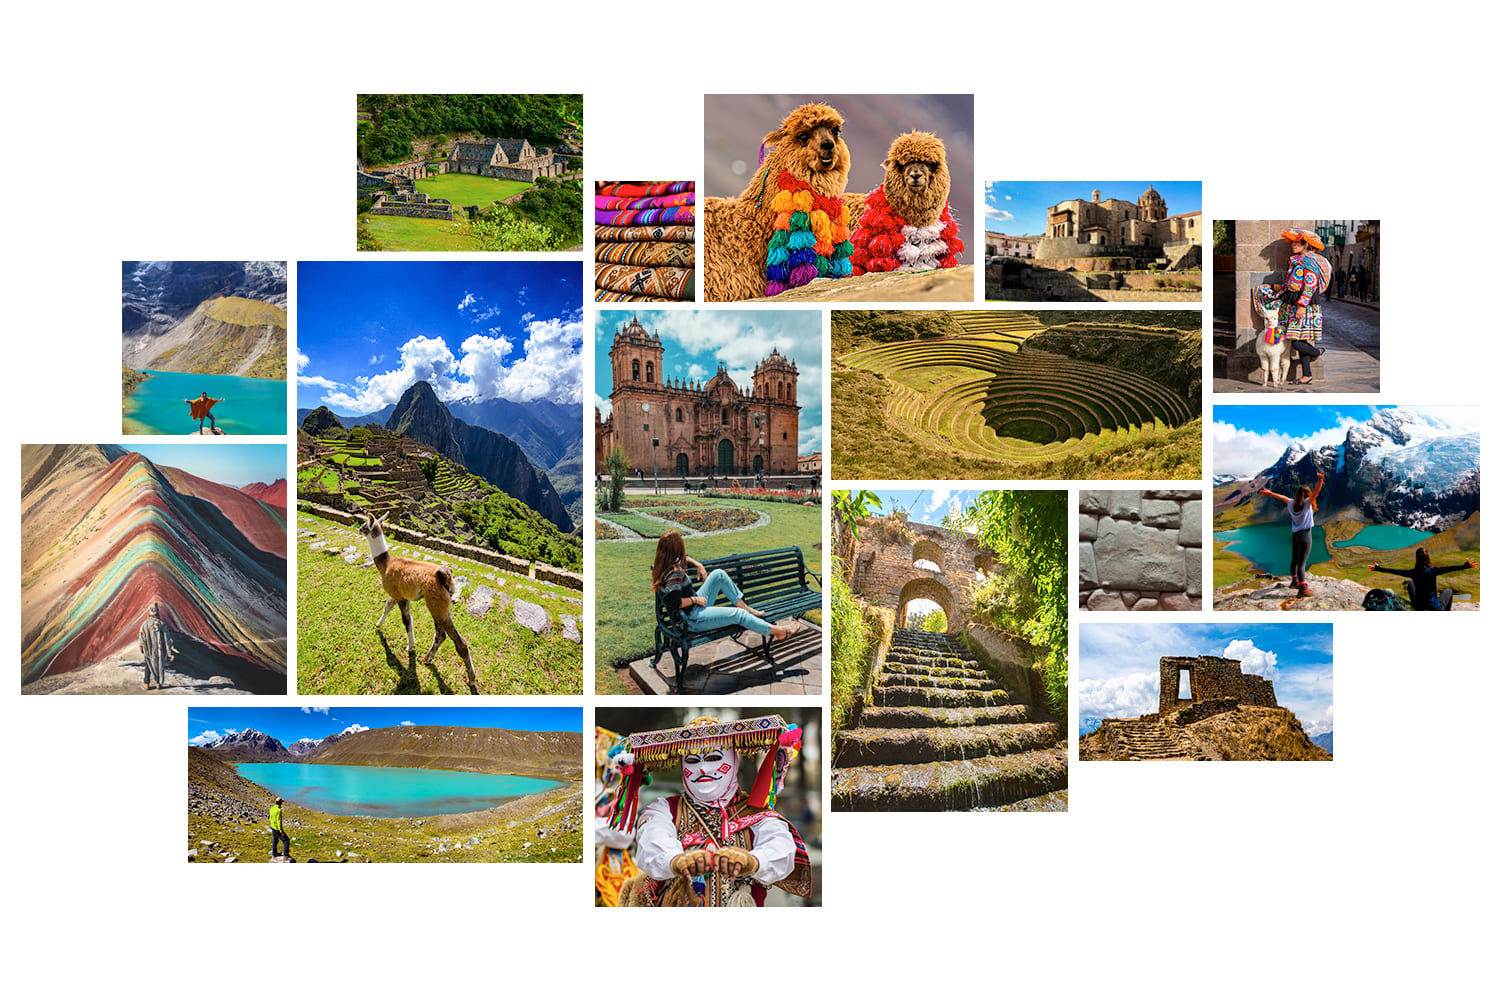 Cusco, the navel of the world